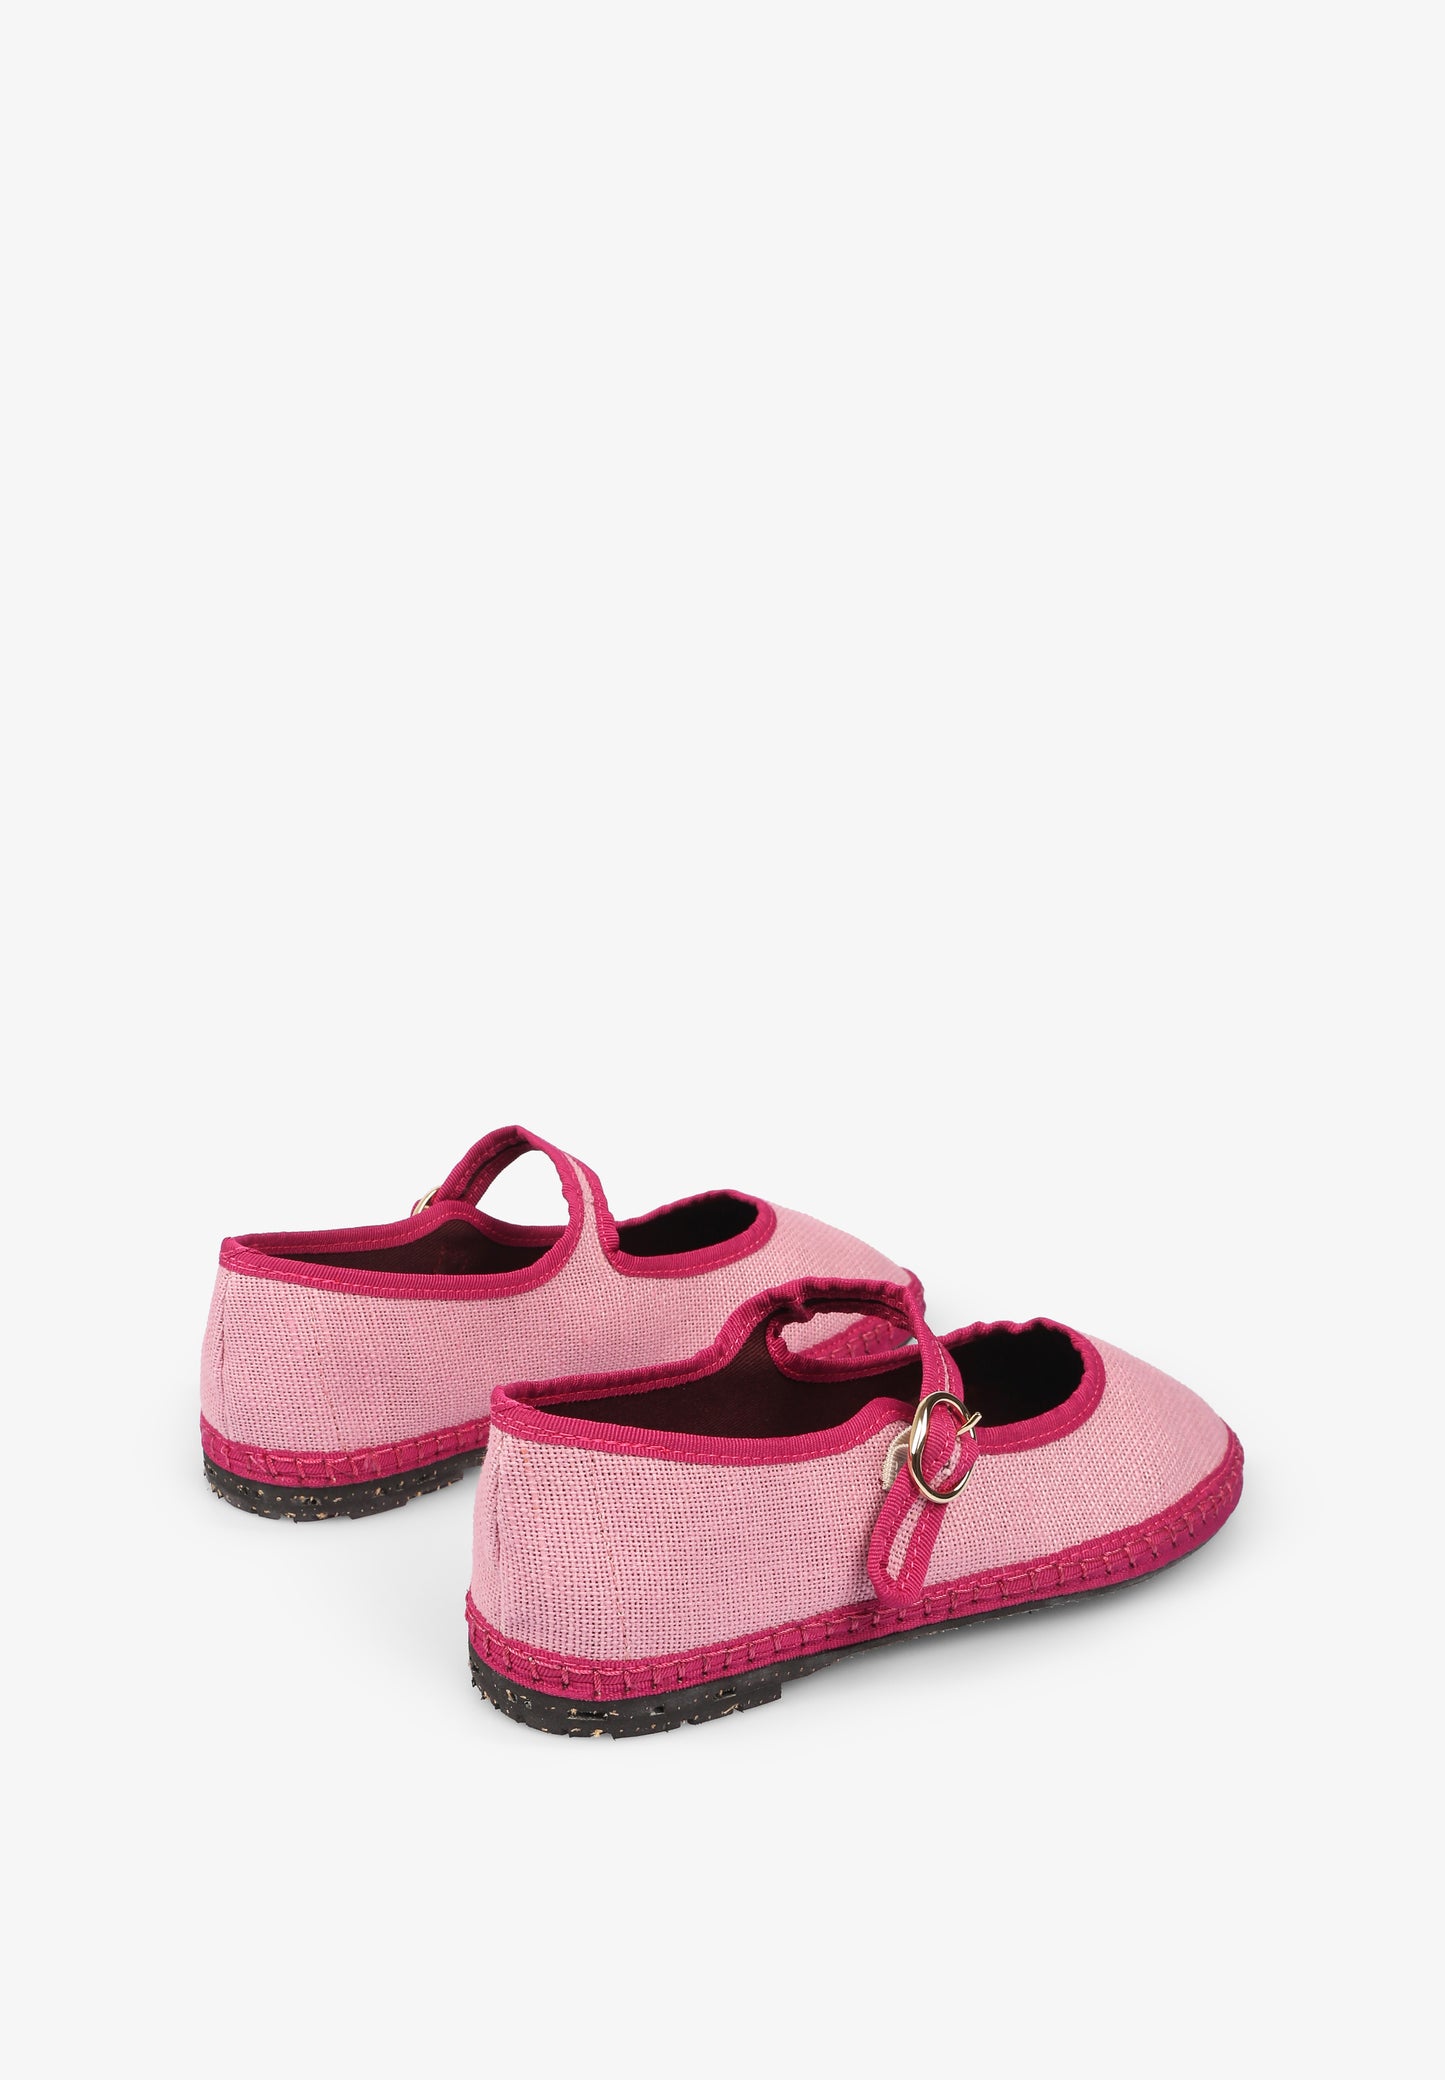 FLABELUS | SLIPPERS CATALINA